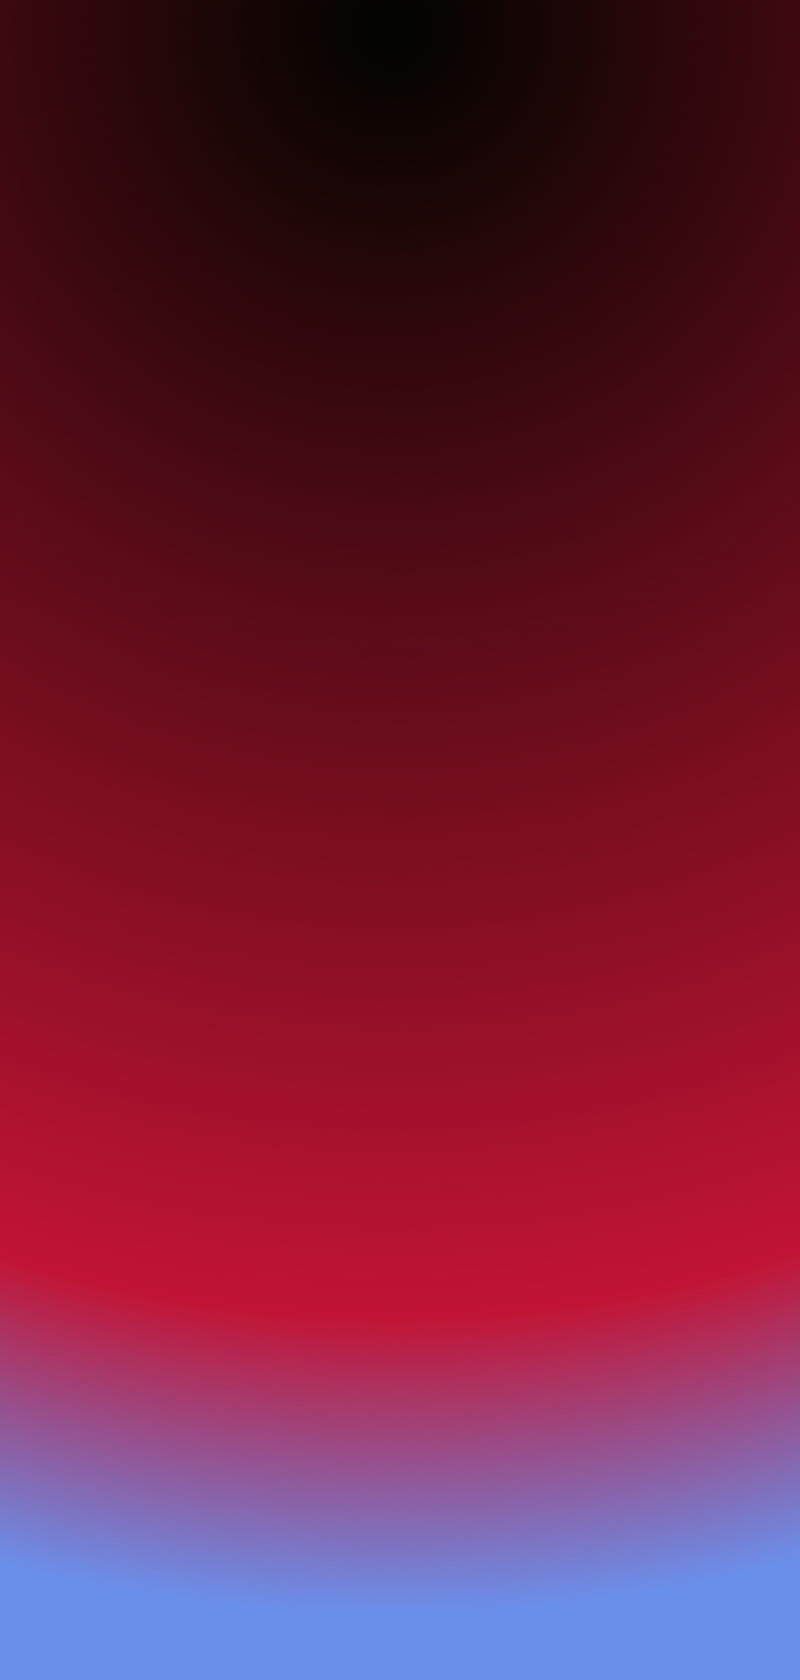 Notch Hide Red Gradien, Aurel, Notch, abstract, amoled, android, art, aura, aurora, background, blue, blur, blurry, calm, color, colorful, colors, colours, cool, dark, fresh, gradient, ios, minimal, minimalistic, modern, new, nice, oled, quality, red, simple, wallpapper, HD phone wallpaper